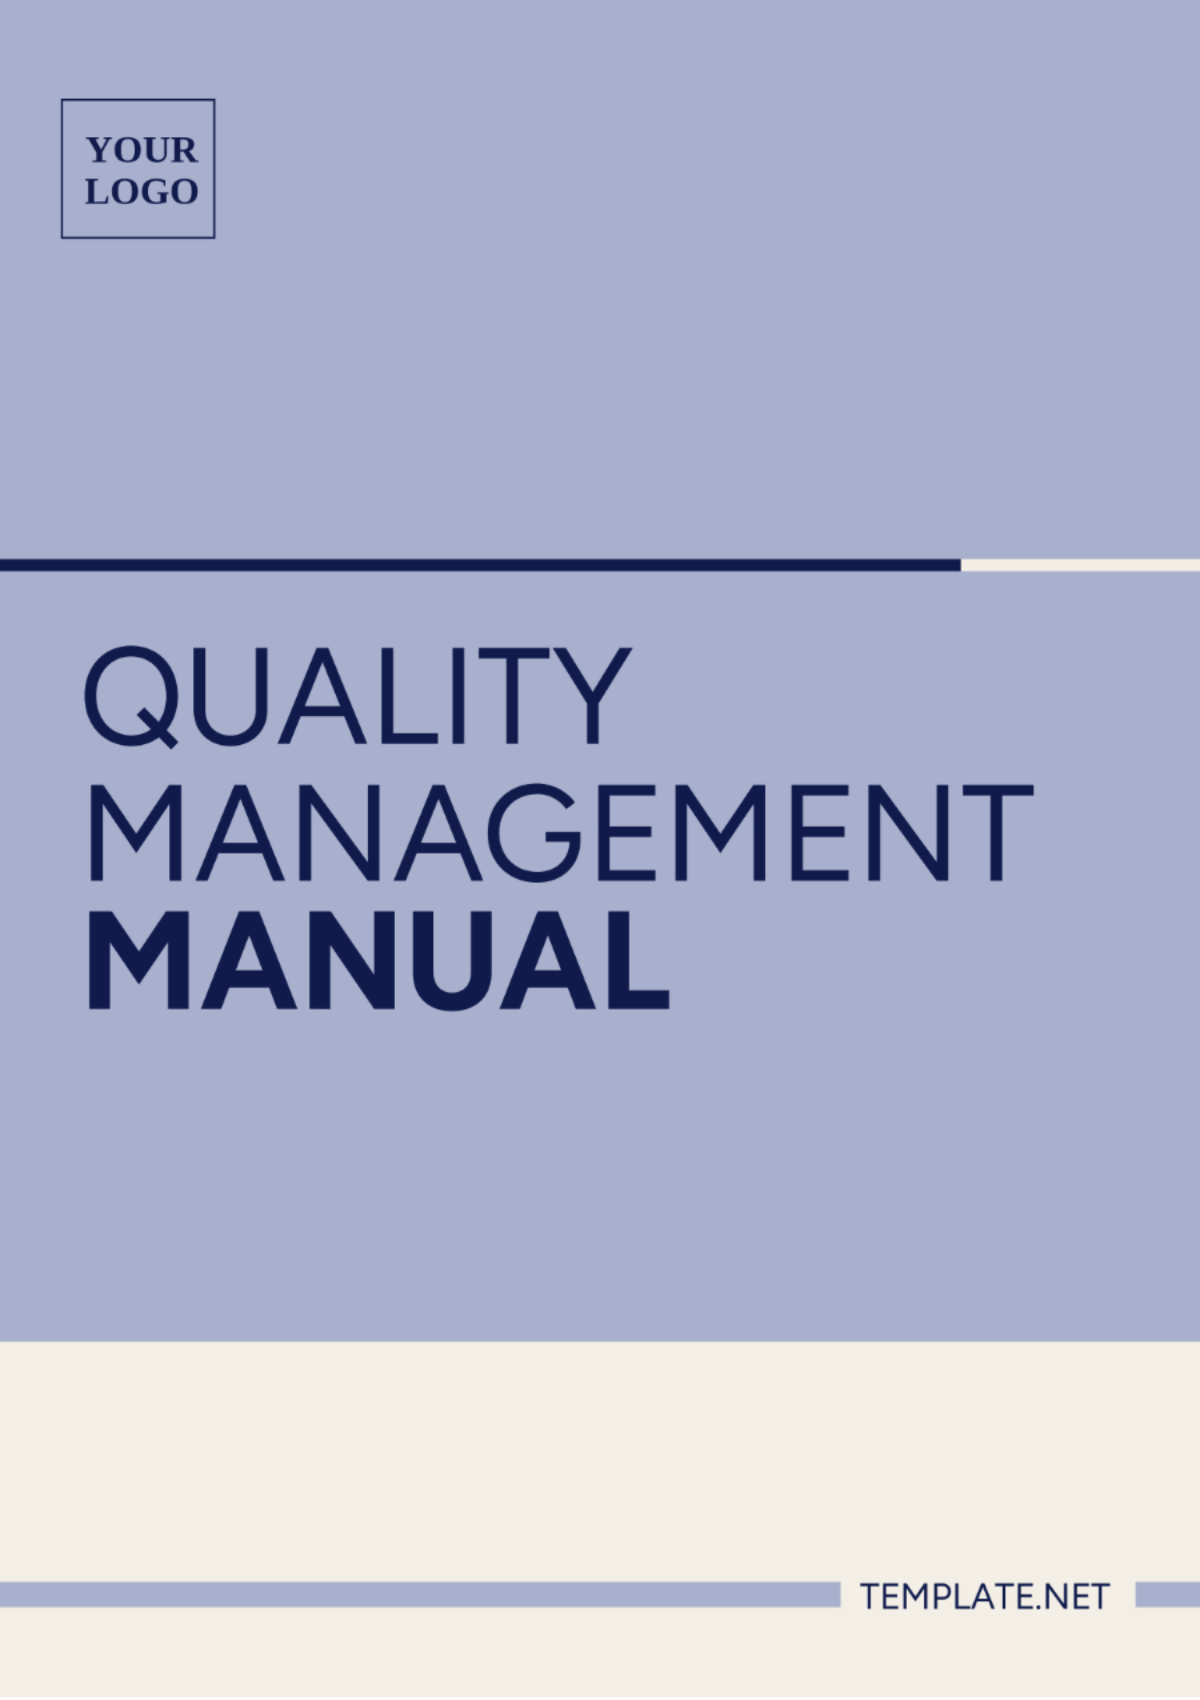 Quality Management Manual Template